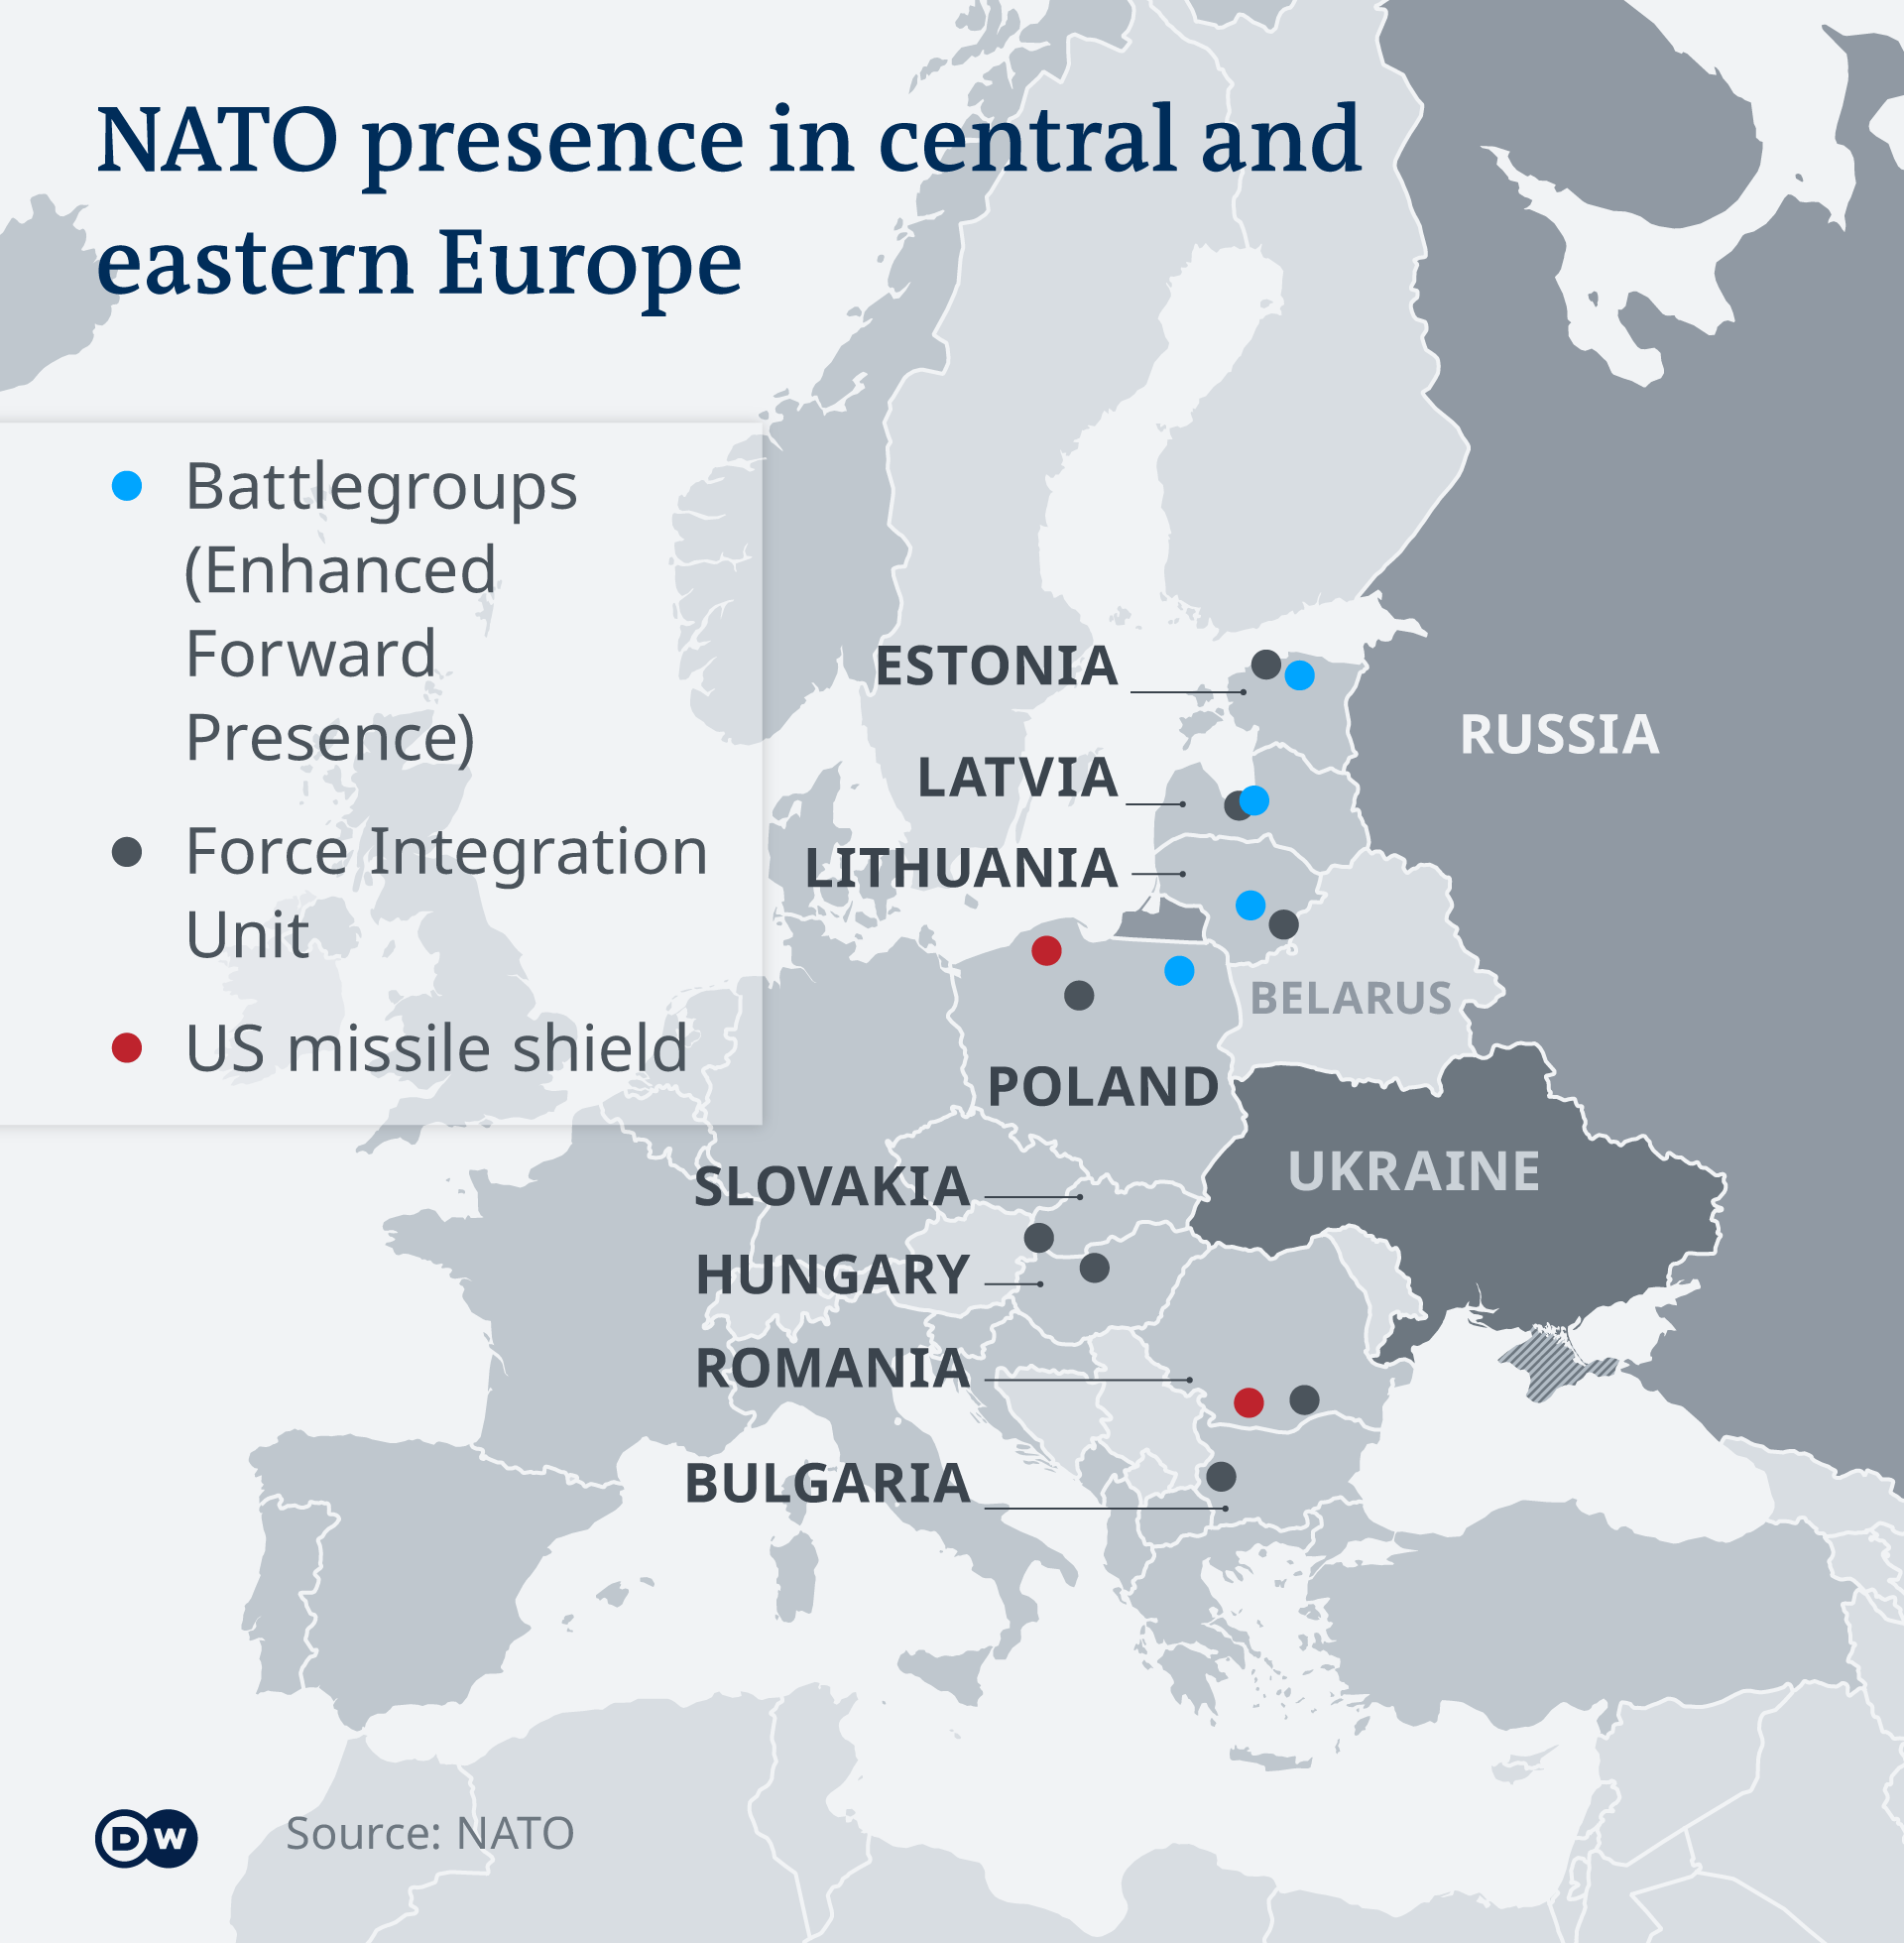 Map of NATO presence in central and eastern Europe